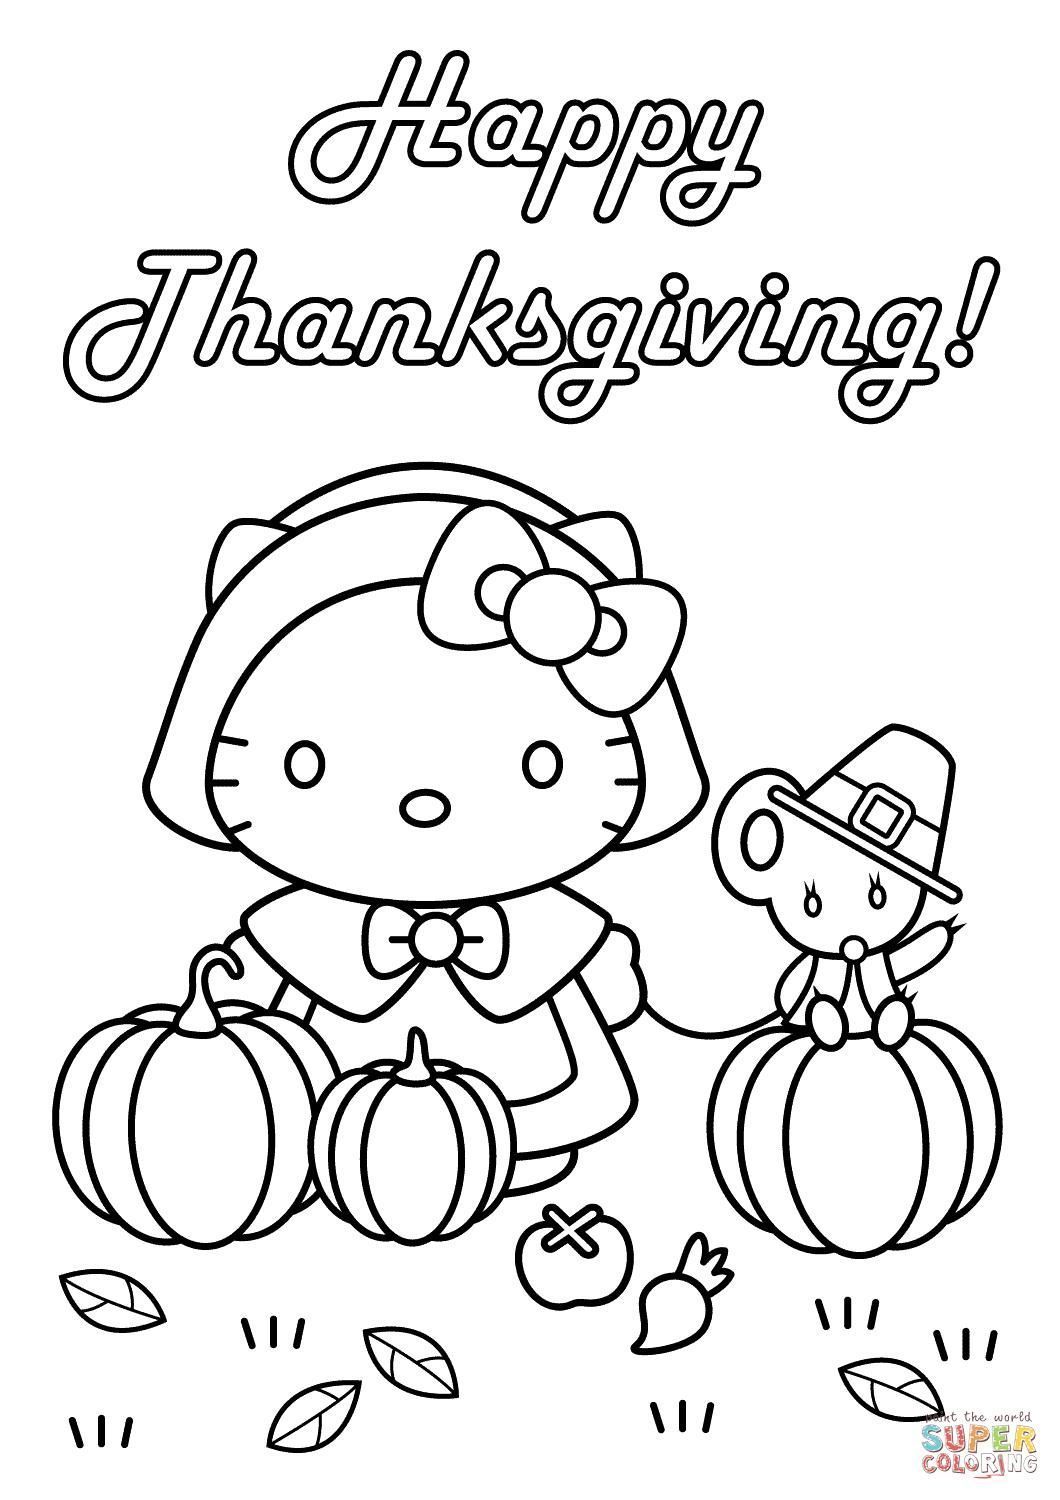 Easy Thanksgiving Coloring Pages at GetColorings.com ...